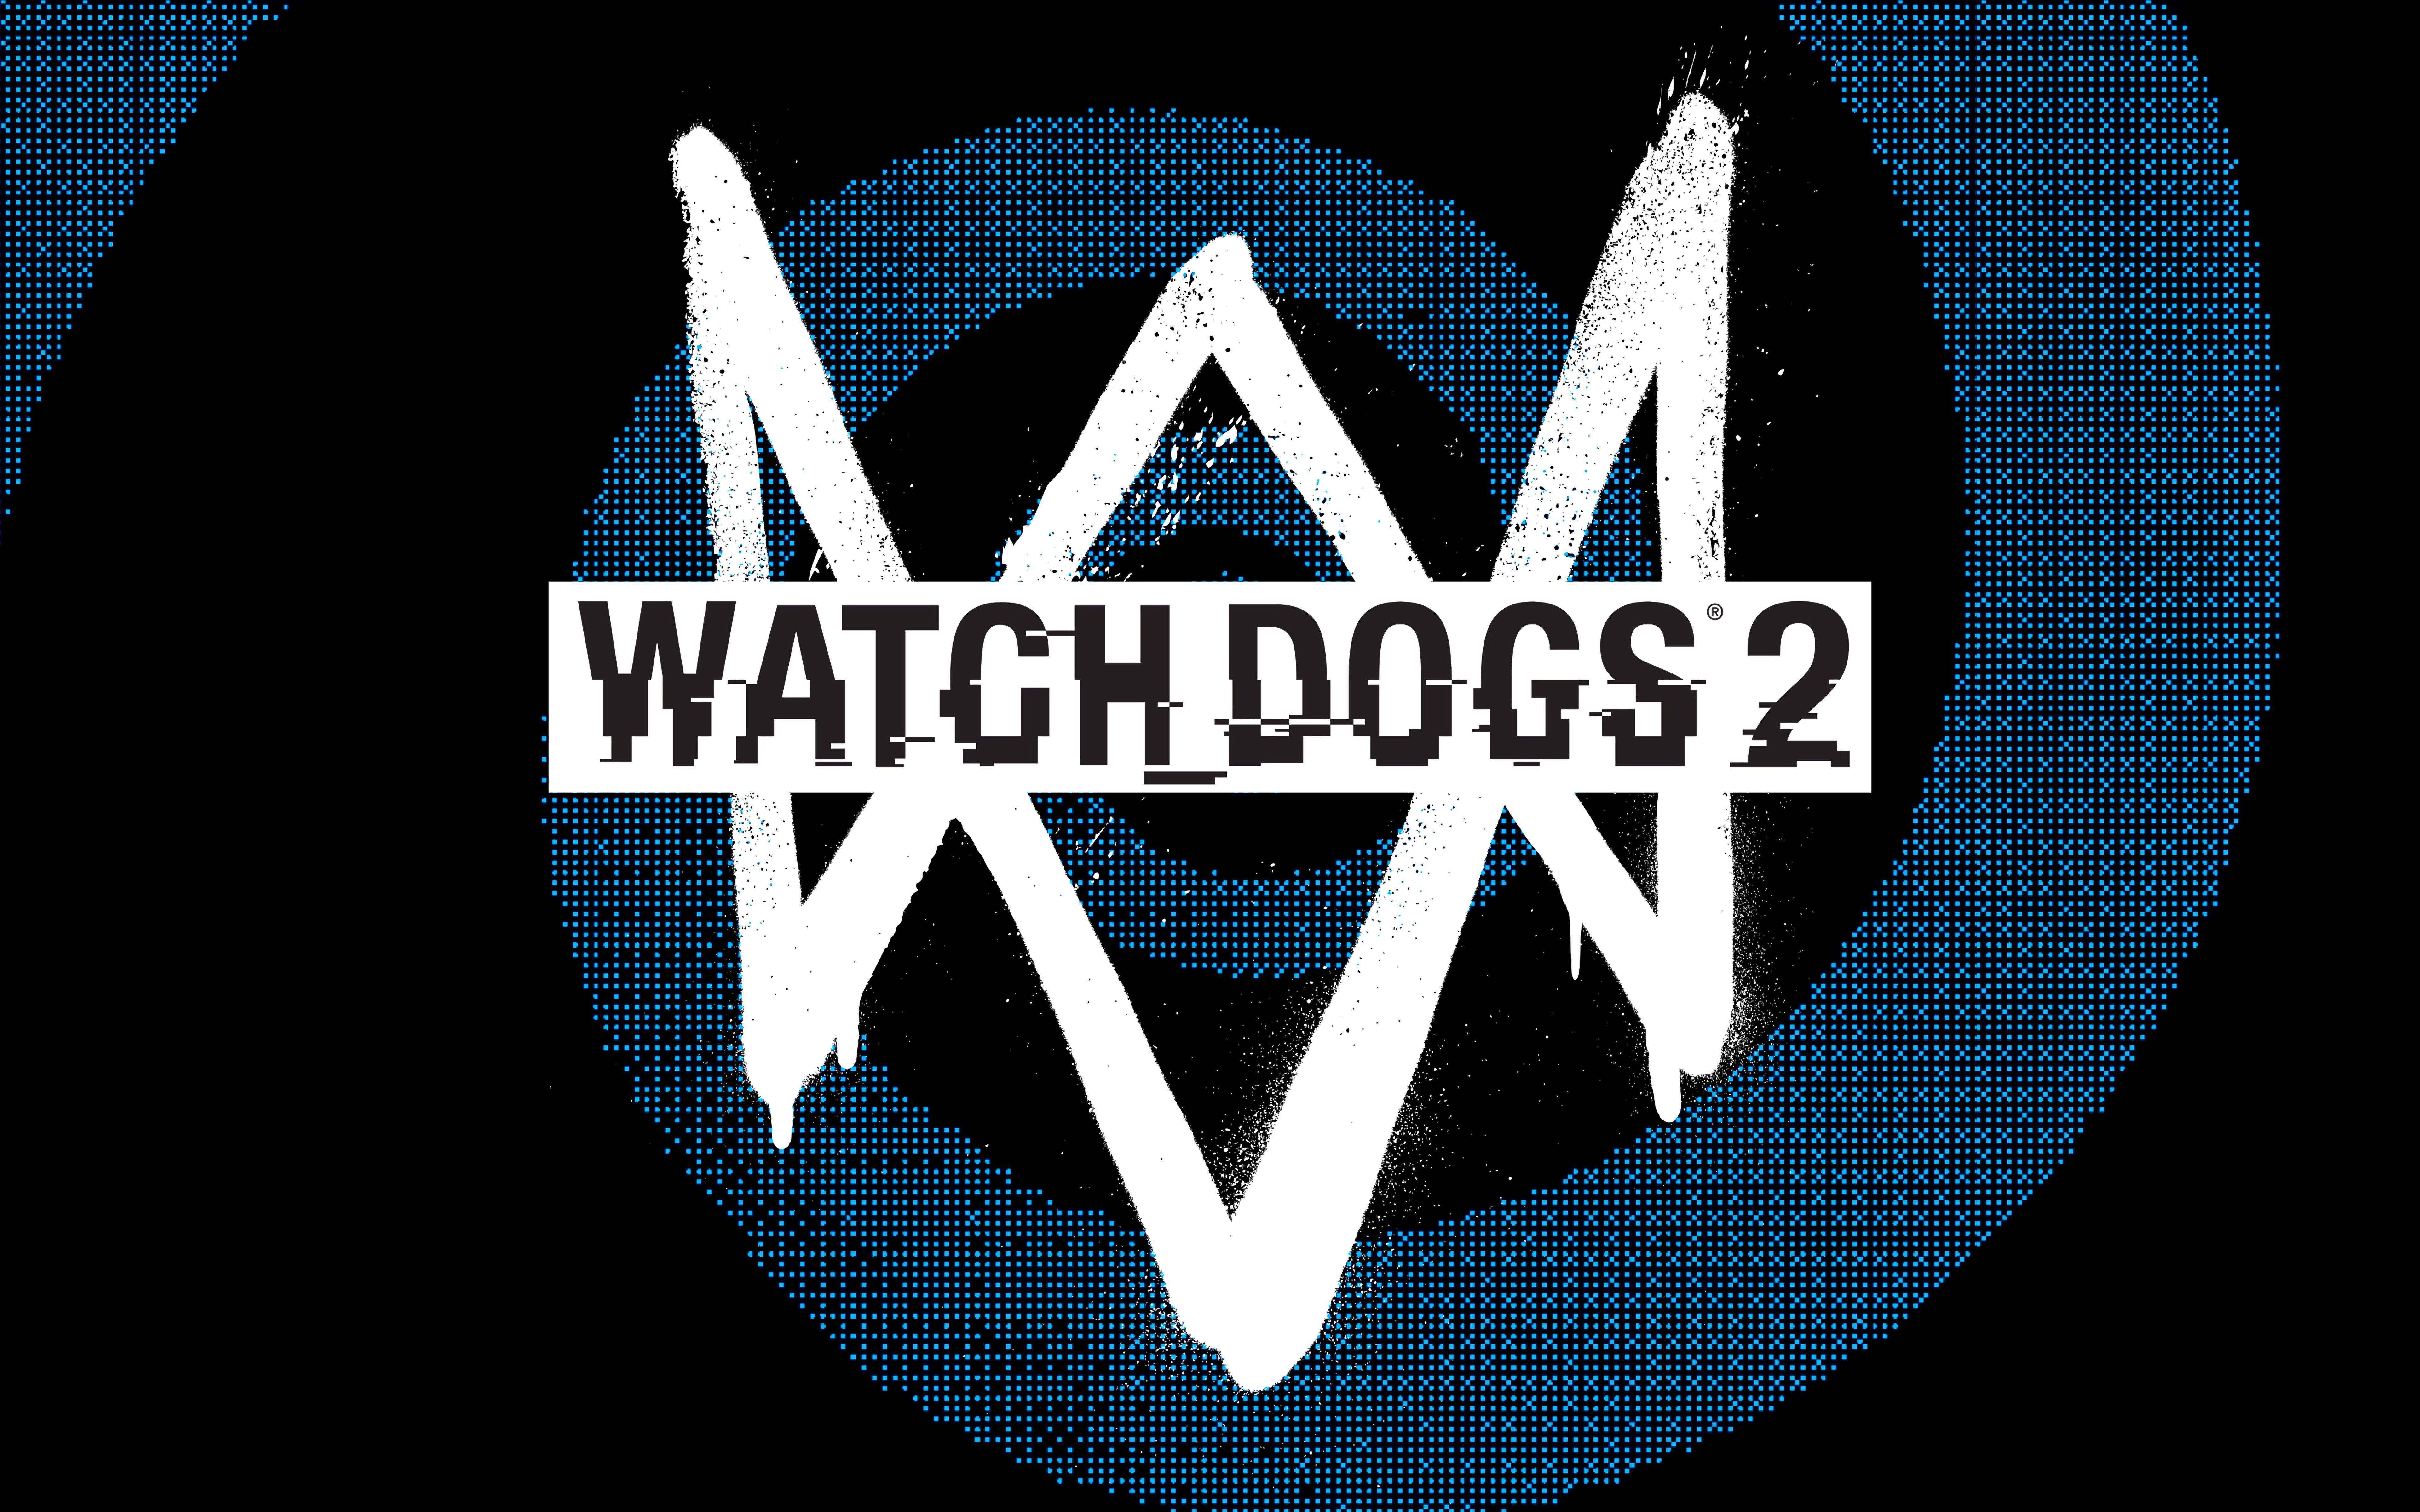 Watch Dogs 2 Wallpaper Image Photo Picture Background